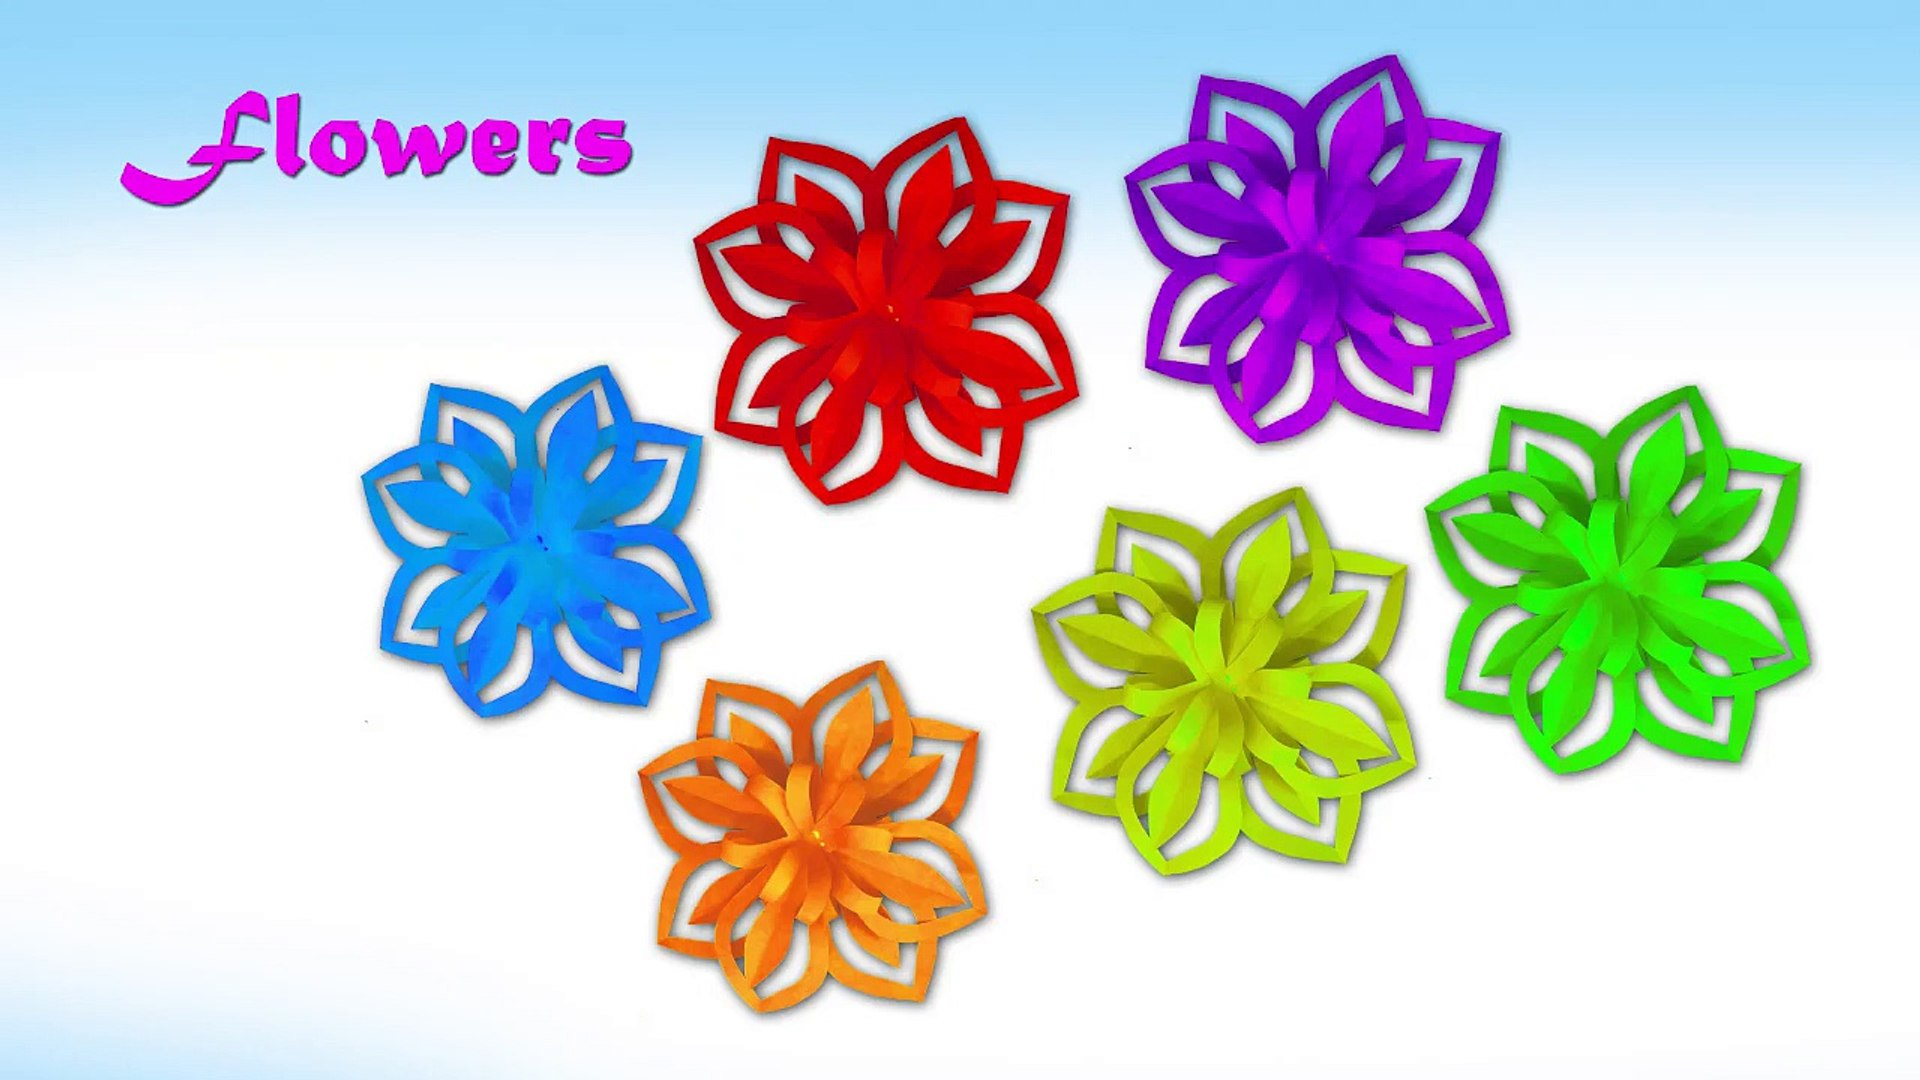 Flower Origami Easy Origami Flowers How To Make Origami Flowers Very Easy Origami For All 9sar